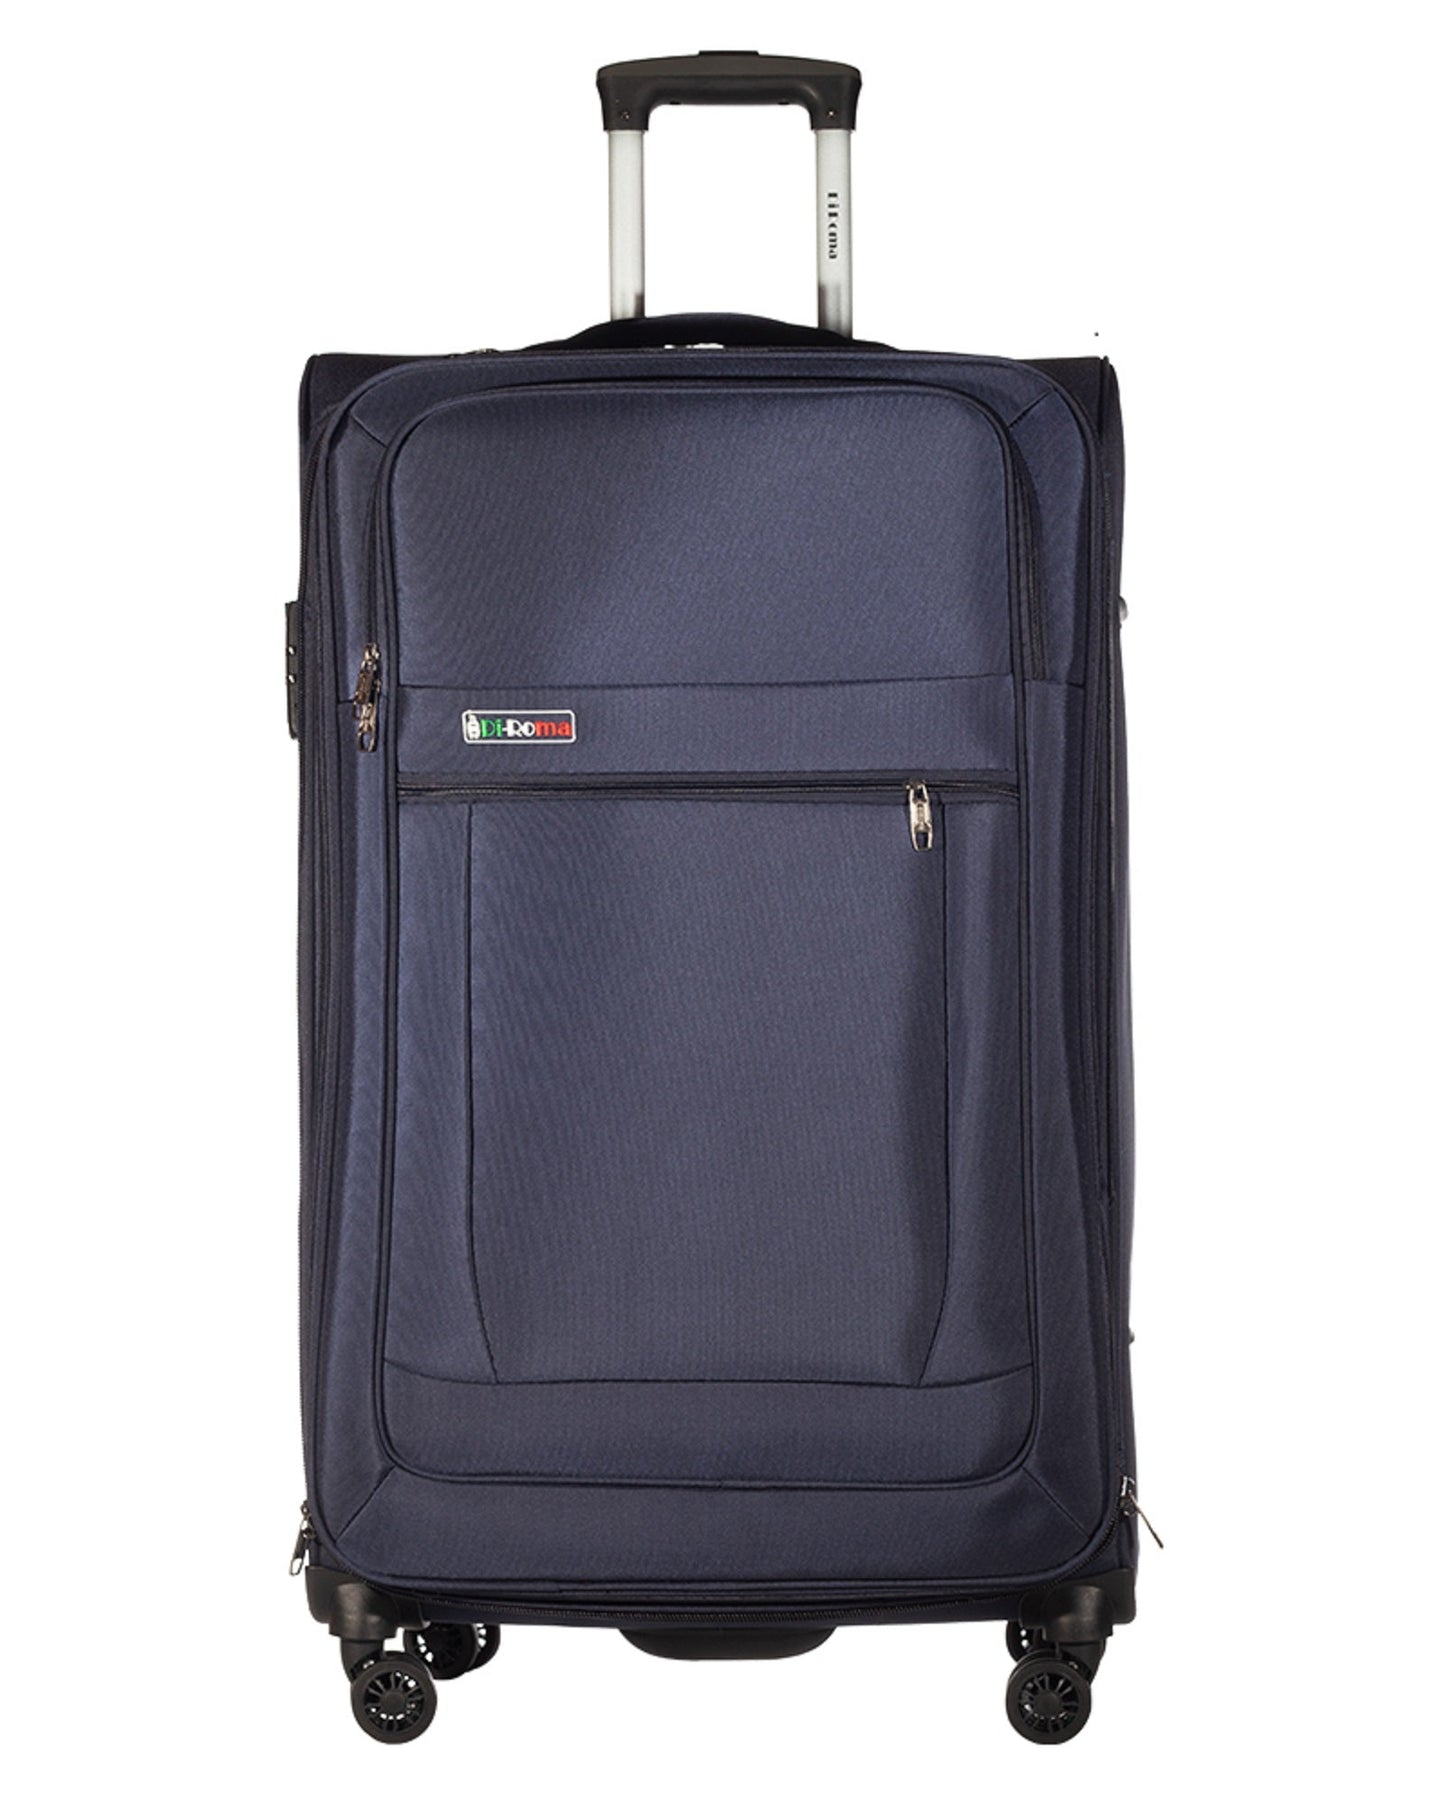 Luca Collection Blue luggage Set 3pc(20/26/30") Suitcase